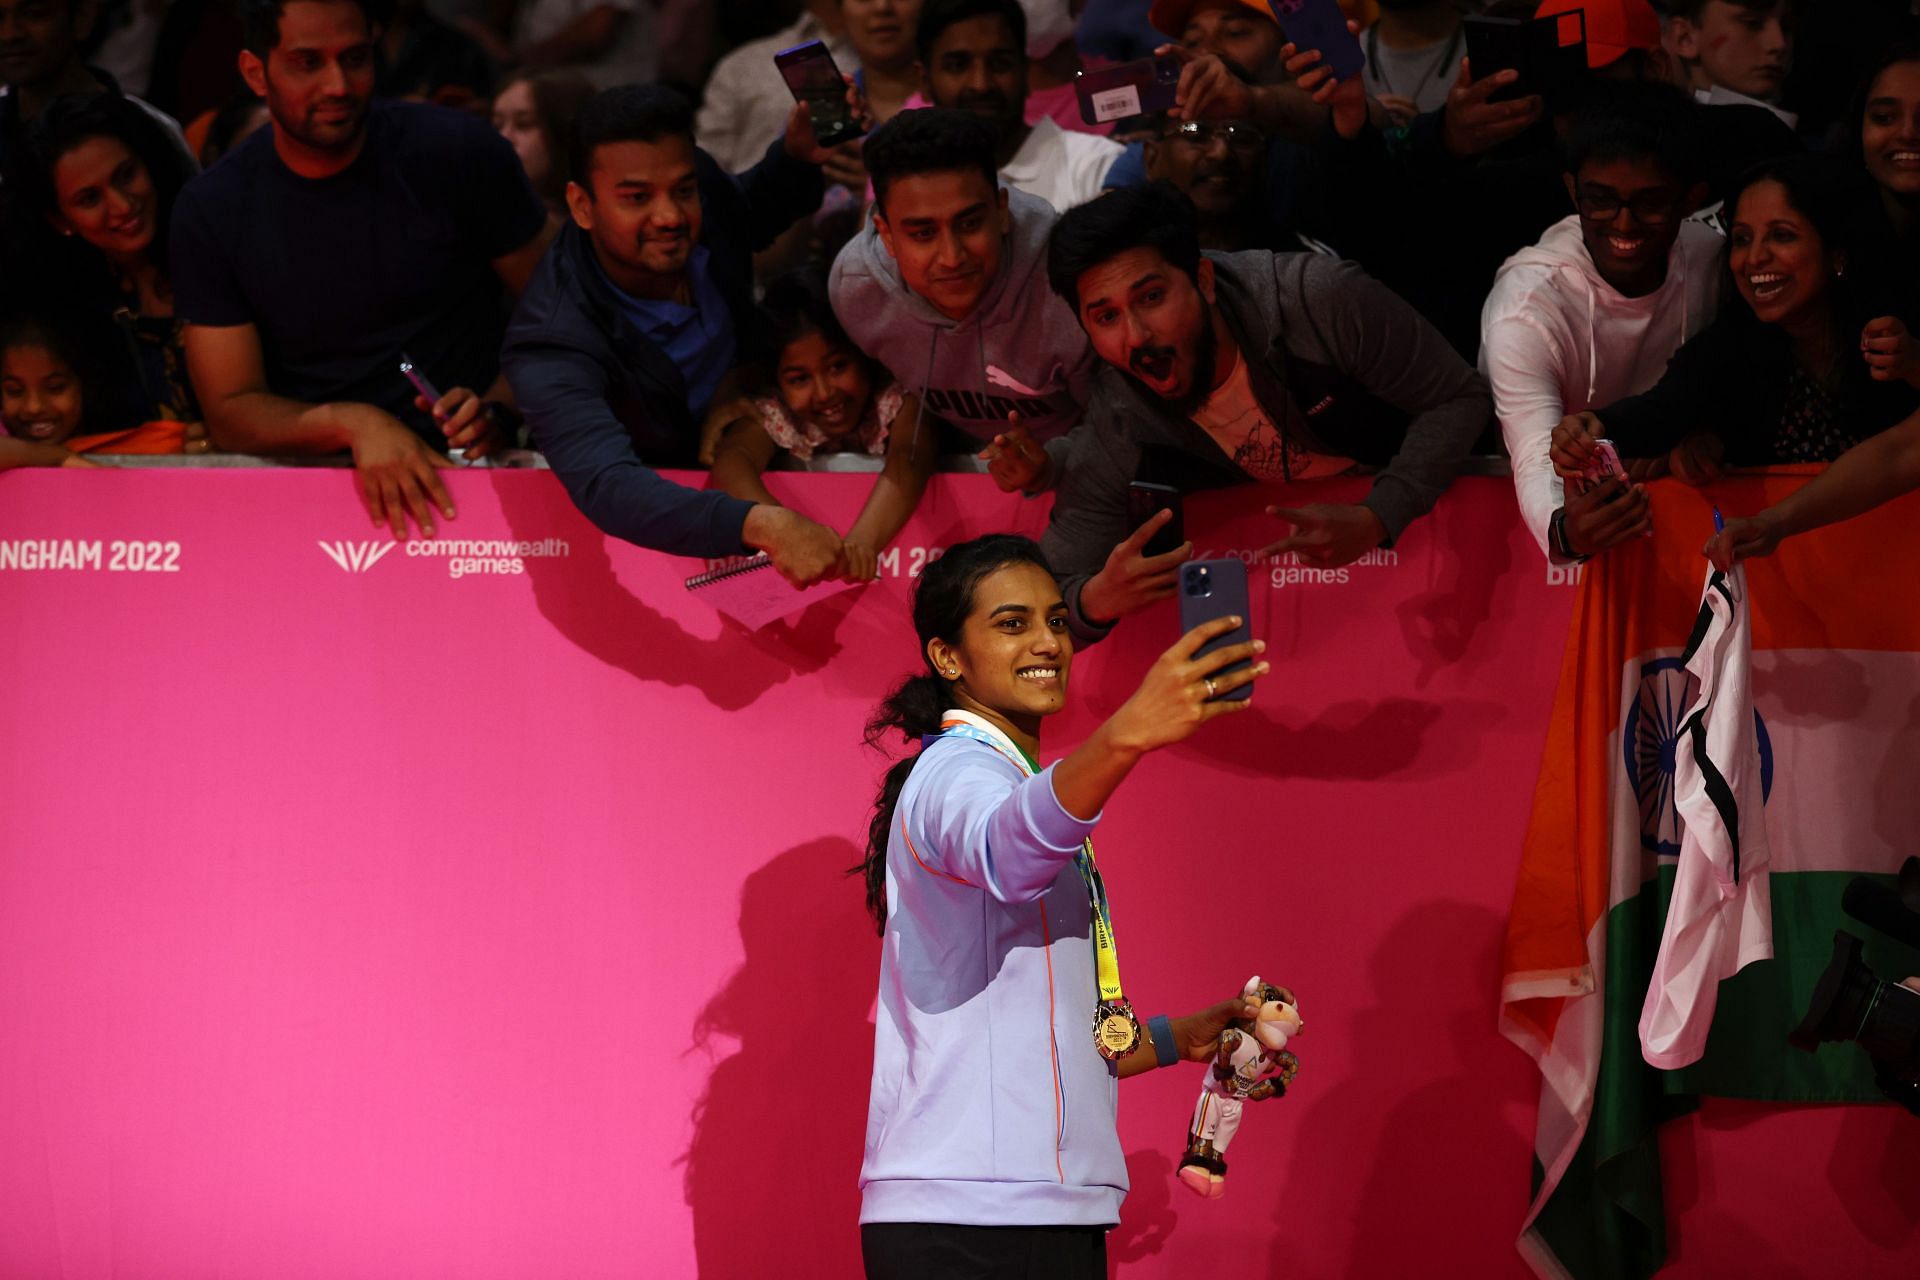 PV Sindhu with fans at the Commonwealth Games.